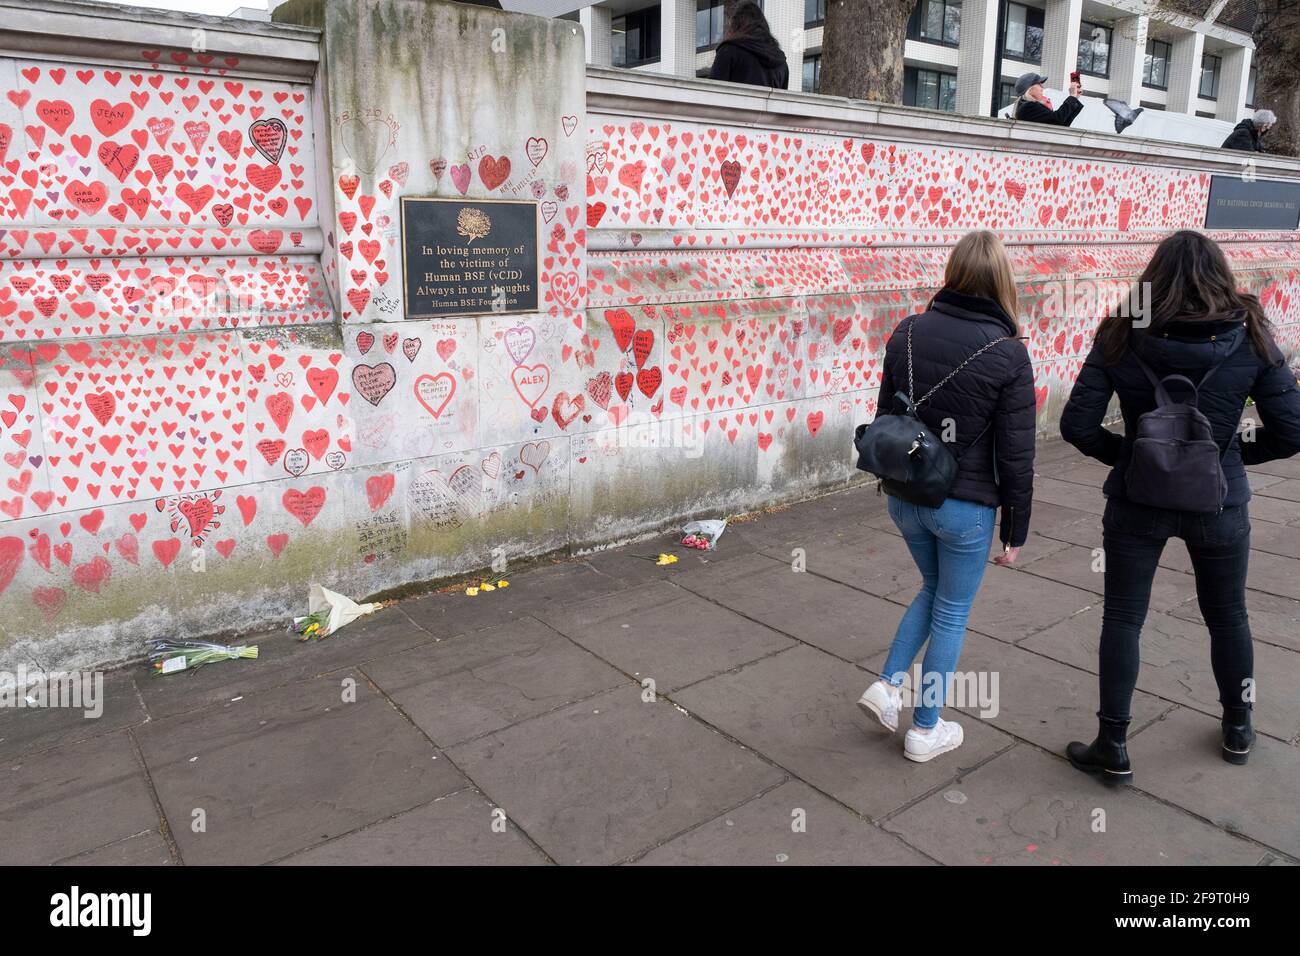 Red hearts painted in memory of people who have died of Covid-19 during the coronavirus pandemic at the National Covid Memorial Wall on 13th April 2021 in London, United Kingdom. The wall is  a place for people to come to reflect or to write messages or the names of lost loved ones. The wall represents a tribute to the approximately 150,000 British victims pandemic. Stock Photo